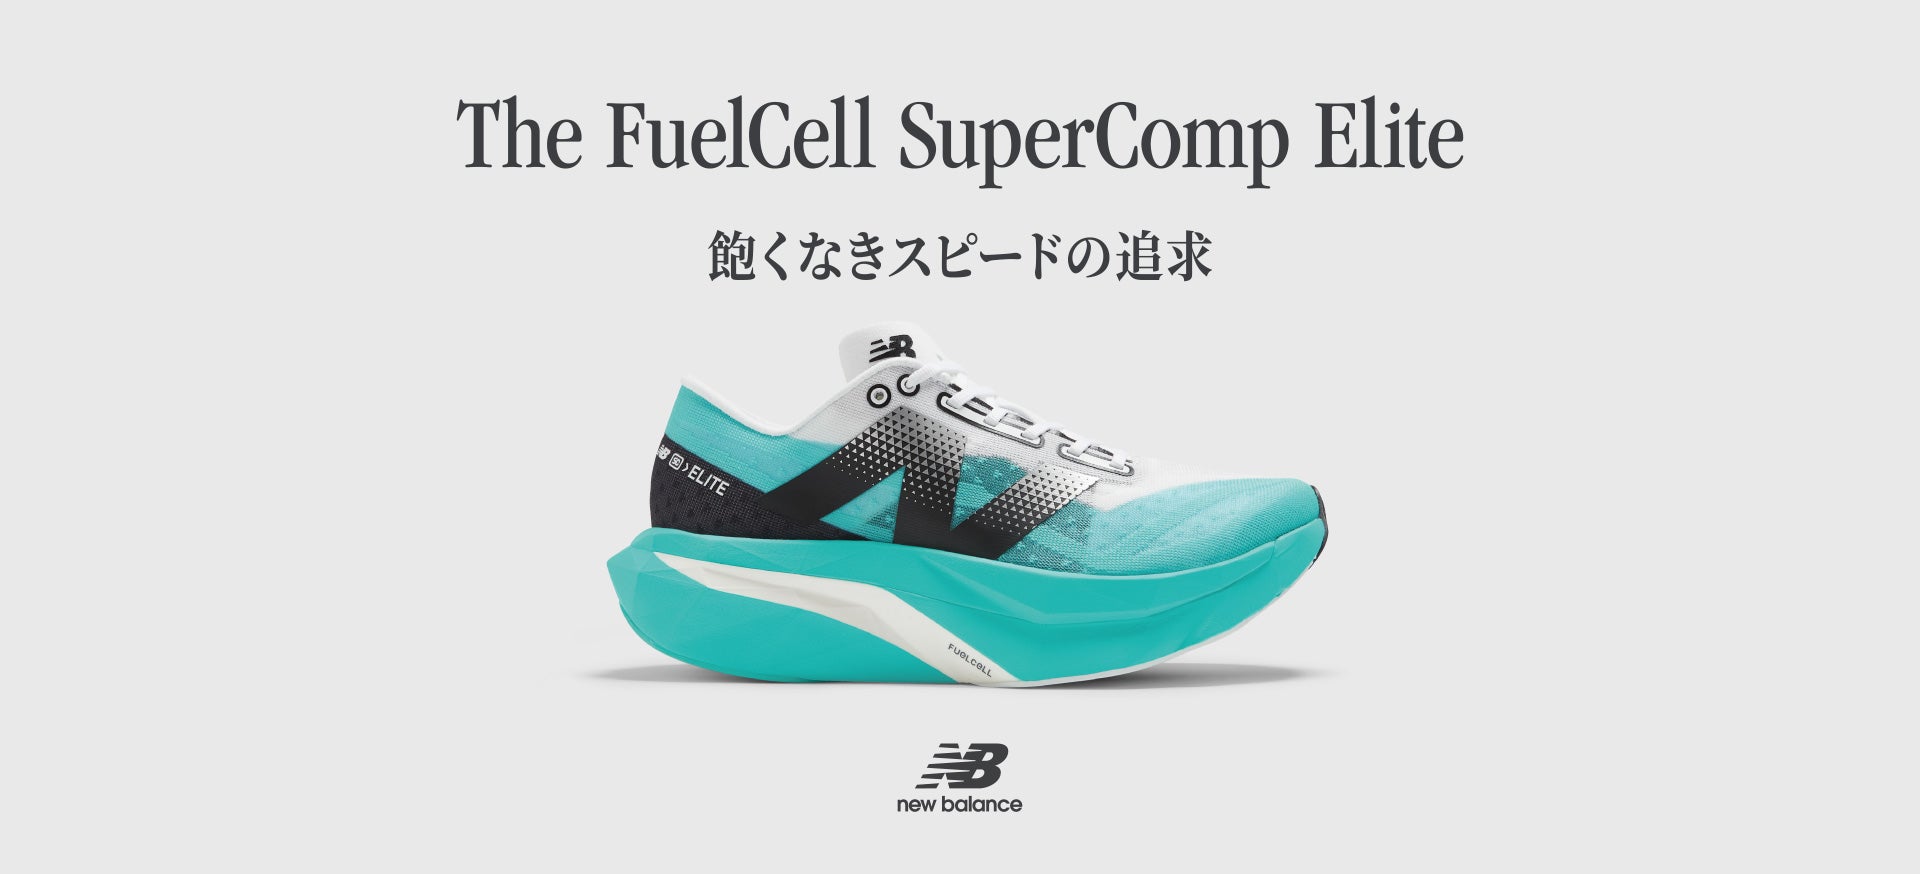 FuelCell SuperComp Elite v4